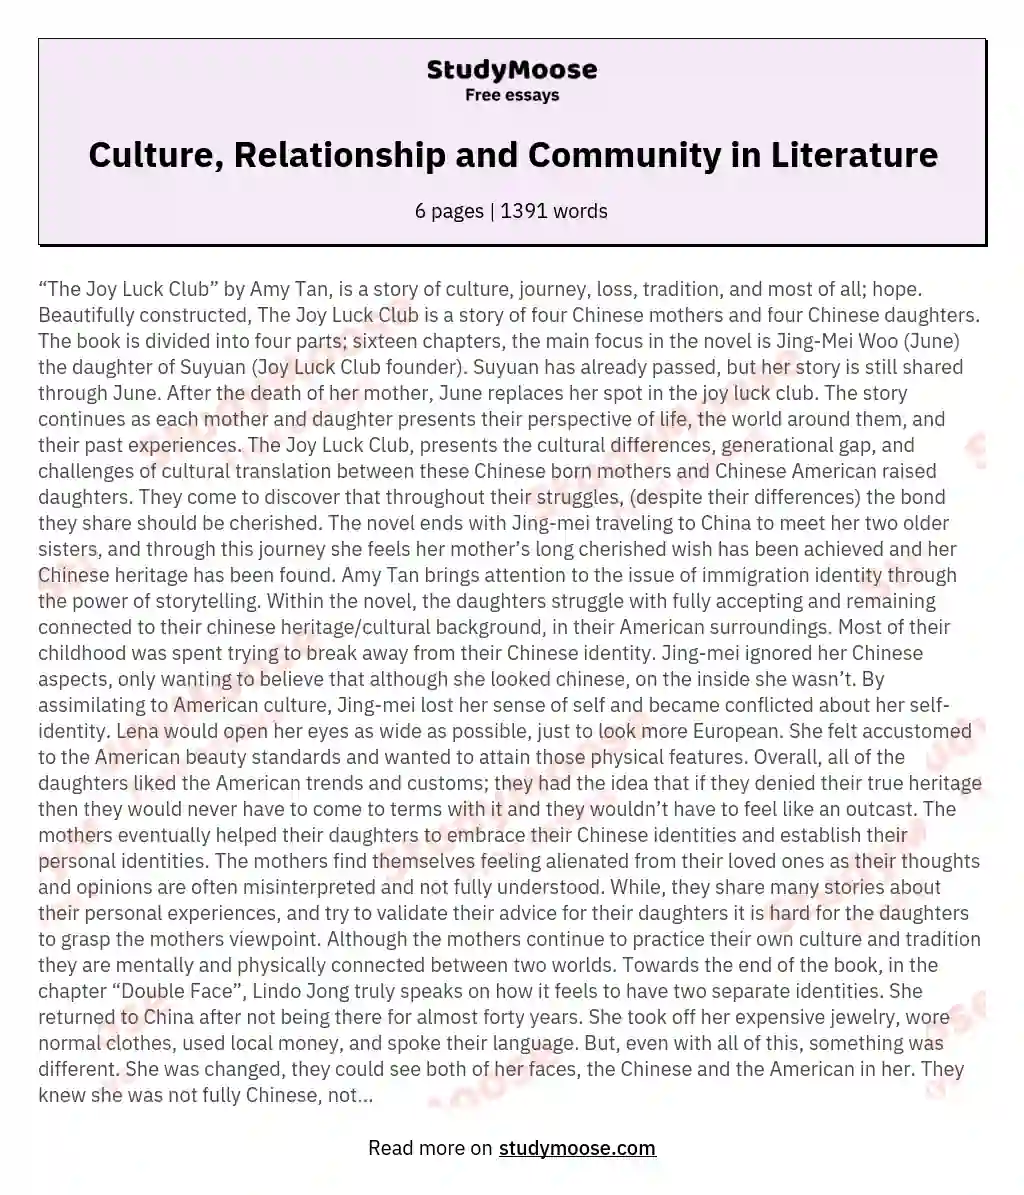 Culture, Relationship and Community in Literature essay